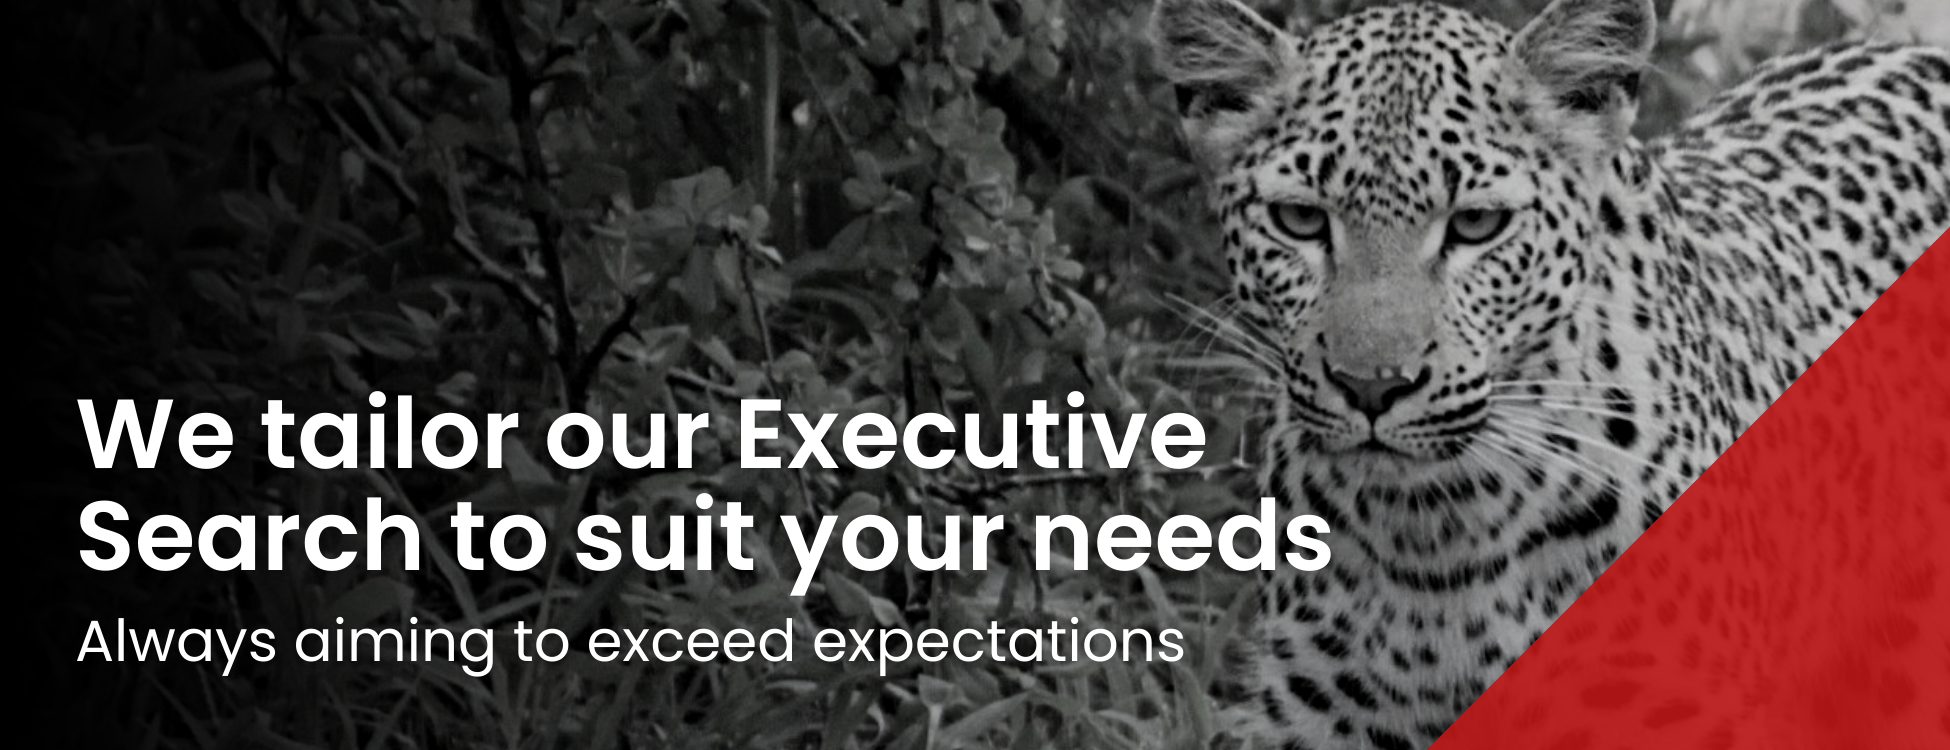 We tailor our Executive Search to suit your needs